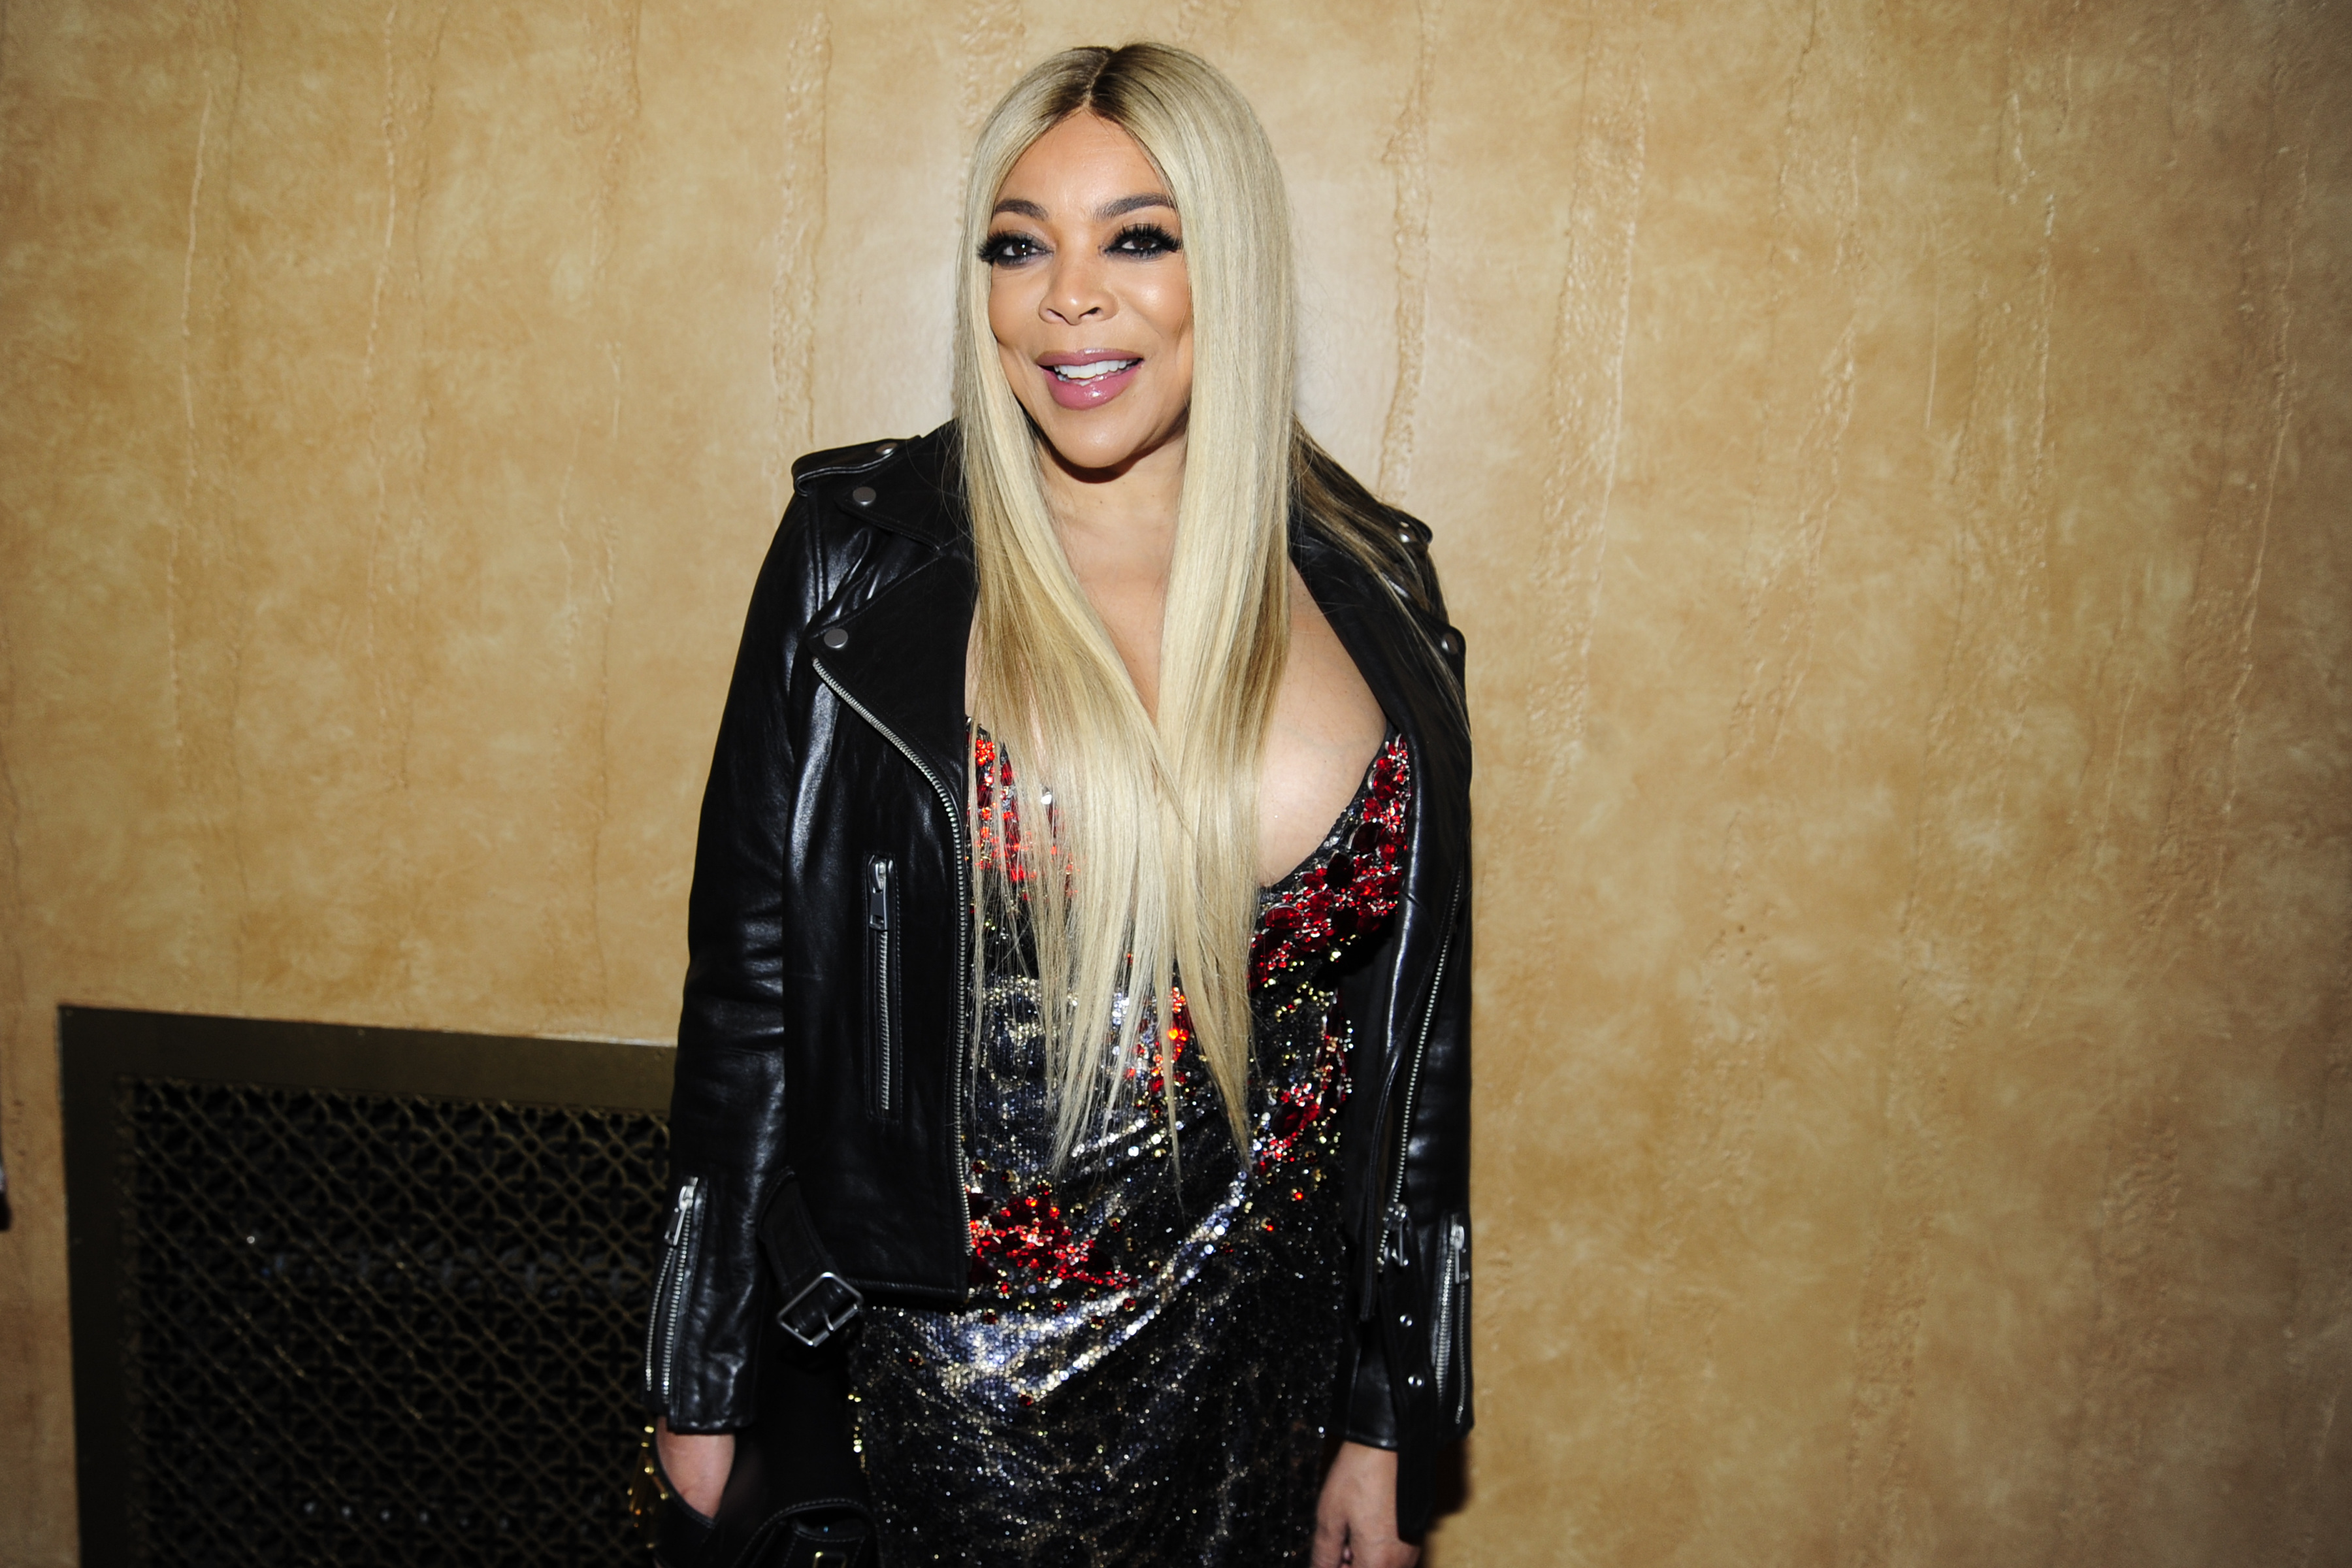 Wendy Williams attends The Blonds x Moulin Rouge! The Musical during New York Fashion Week: The Shows on September 9, 2019 in New York City. | Source: Getty Images